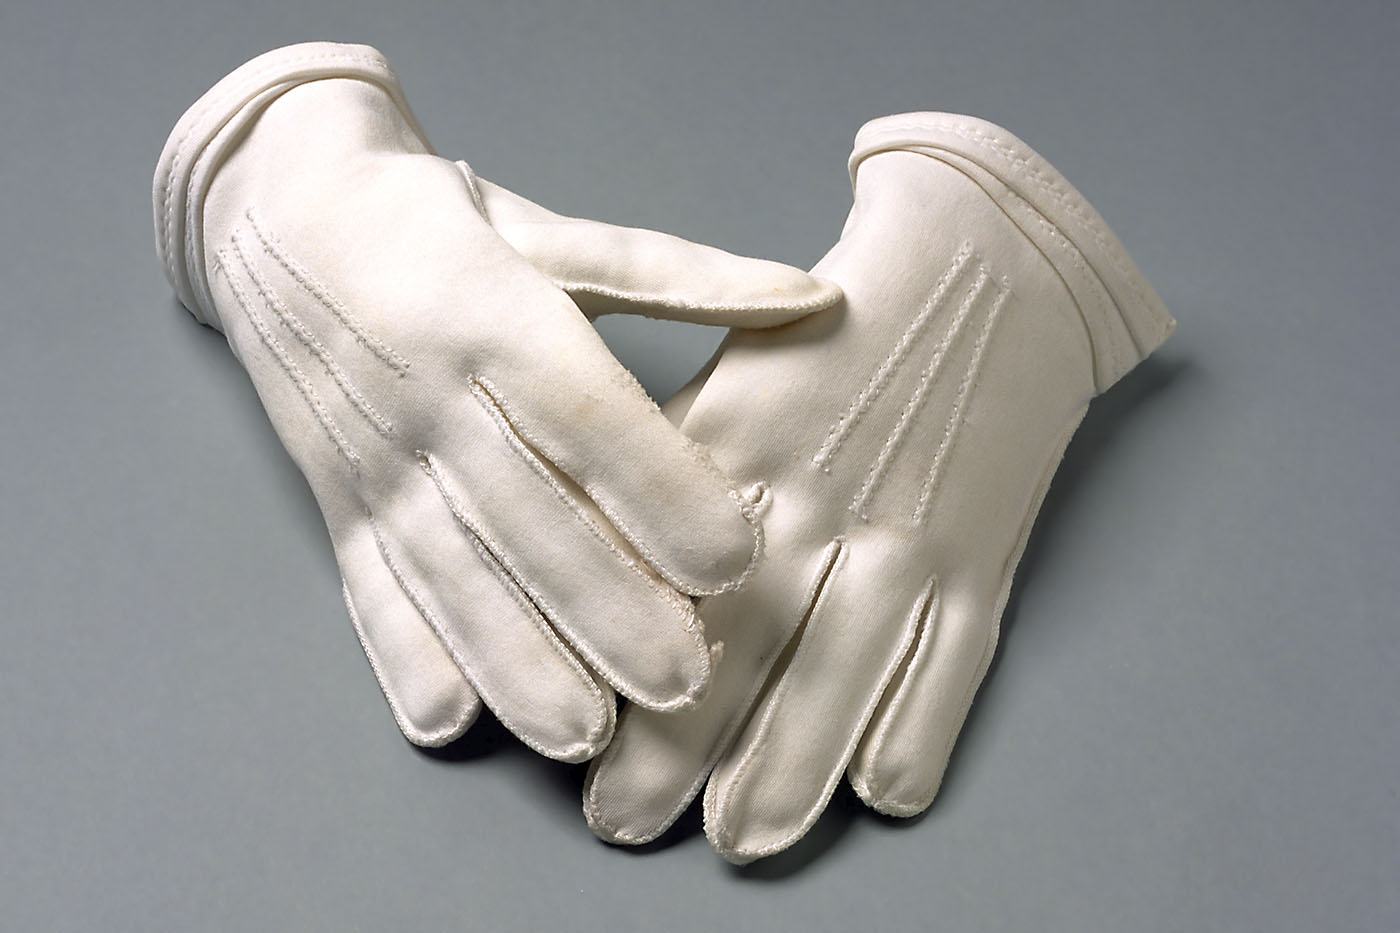 A pair of white fabric gloves.